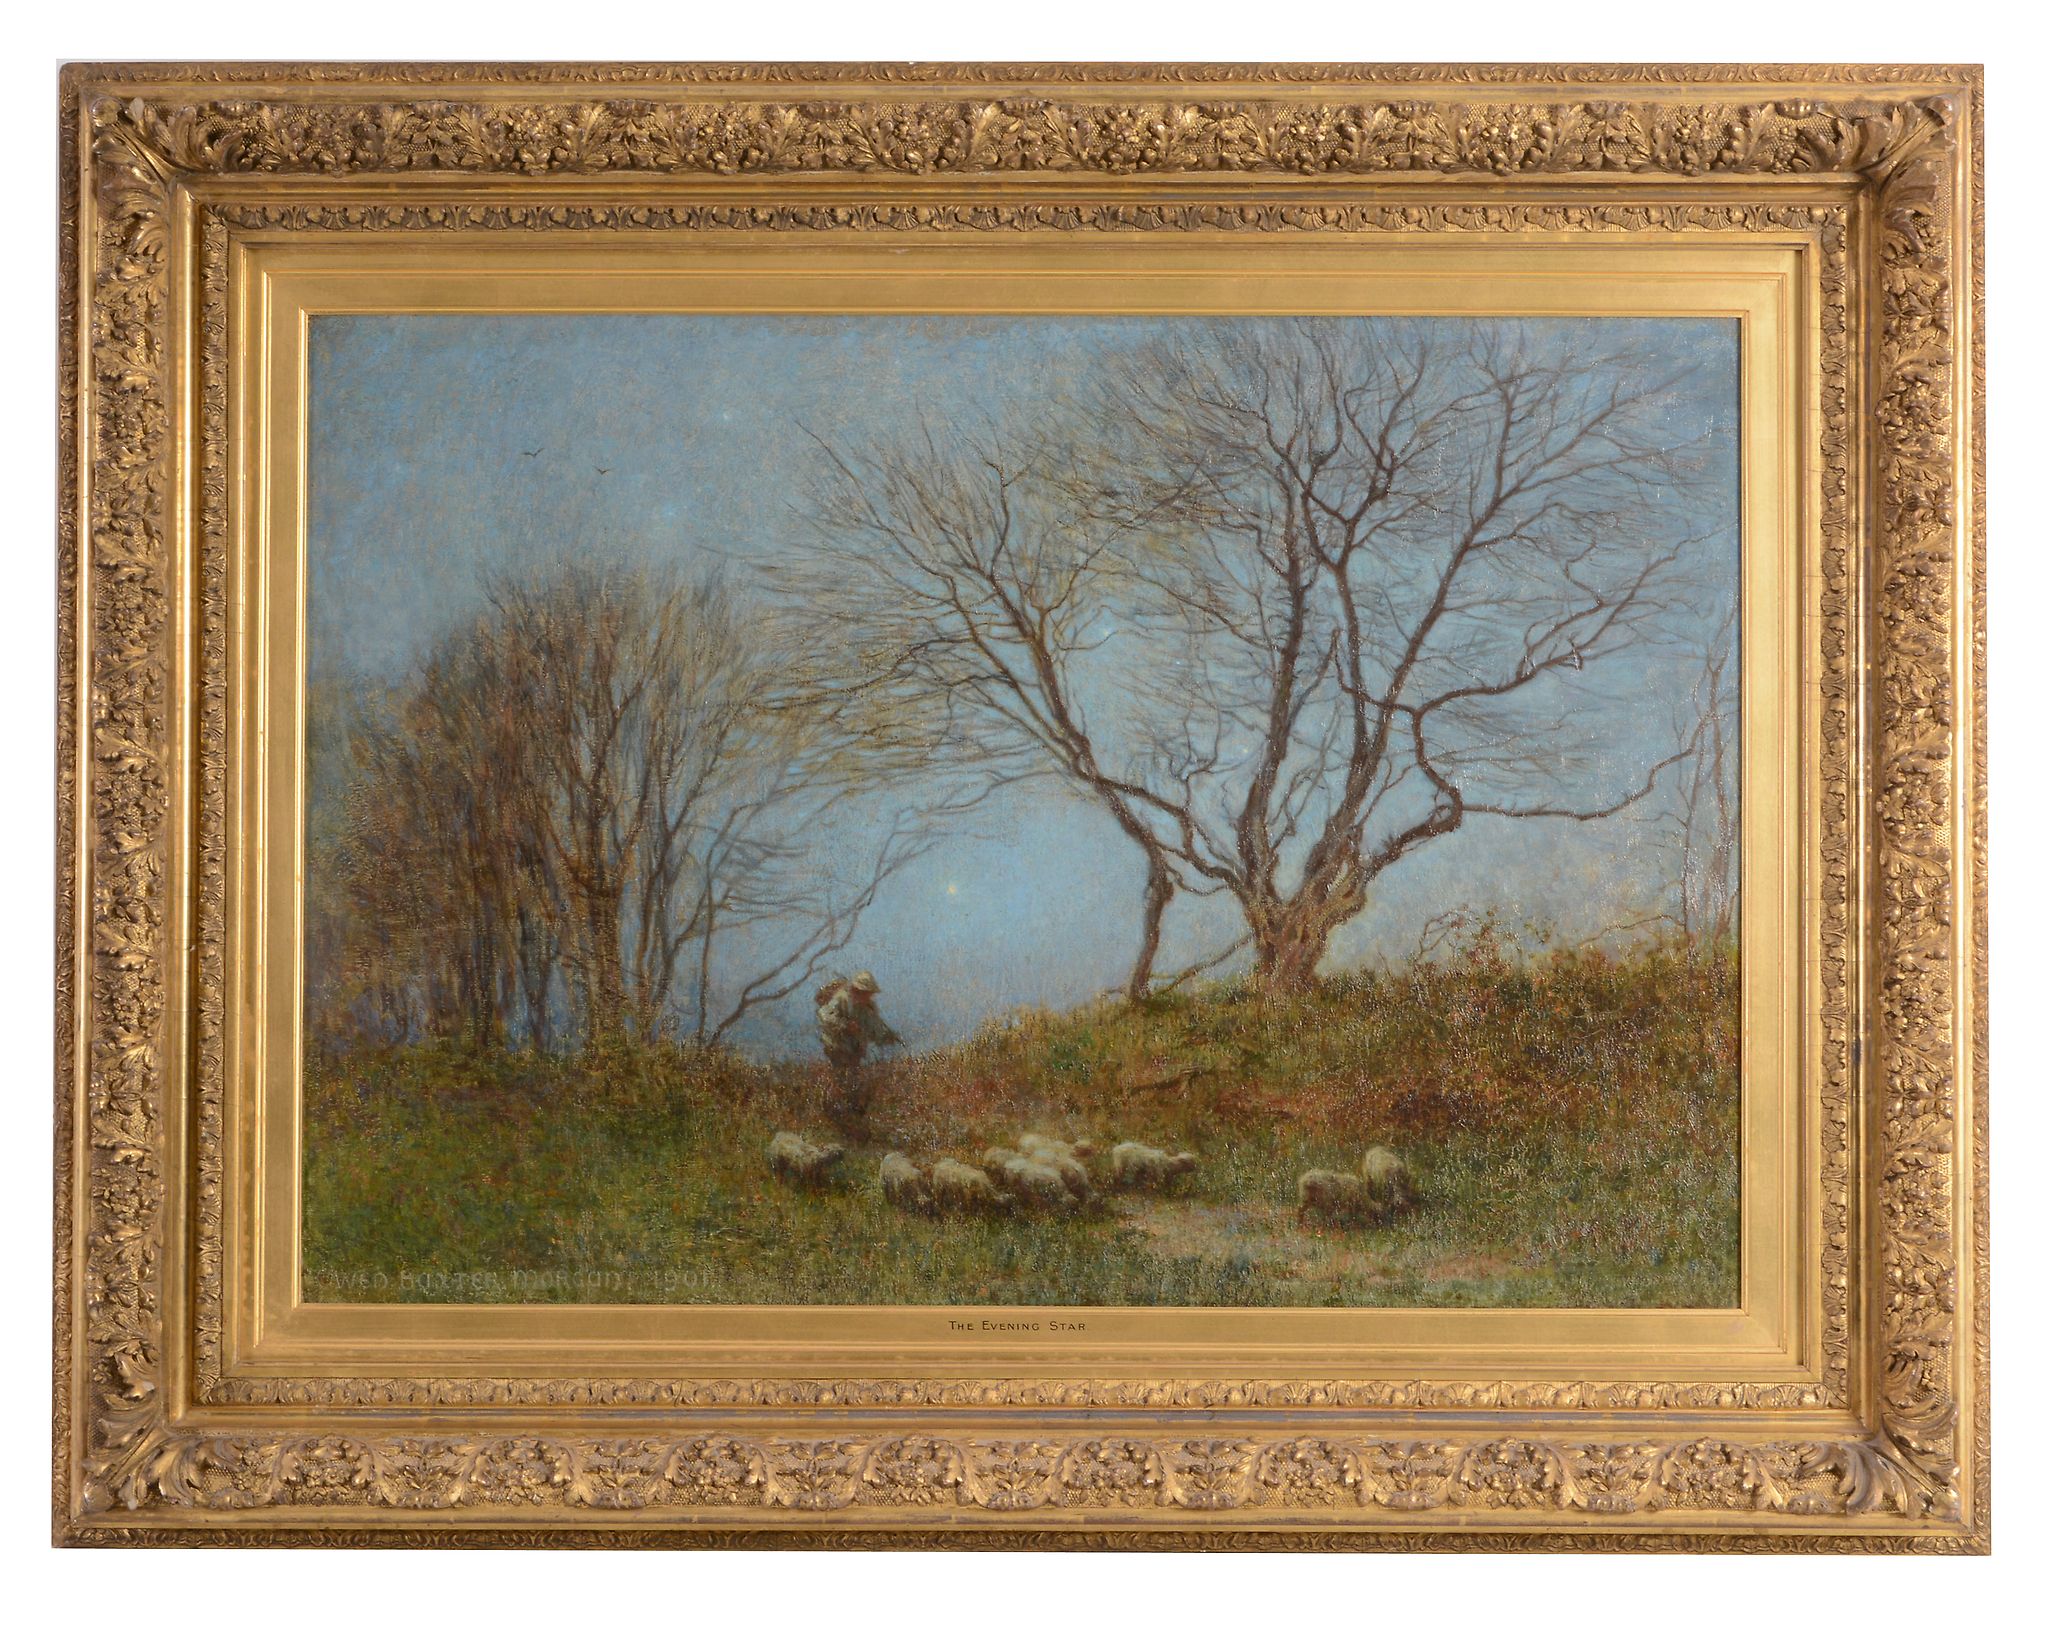 Baxter Morgan (fl.1898-1901) - The Evening Star Oil on canvas Signed and dated   1901   lower left - Image 2 of 3